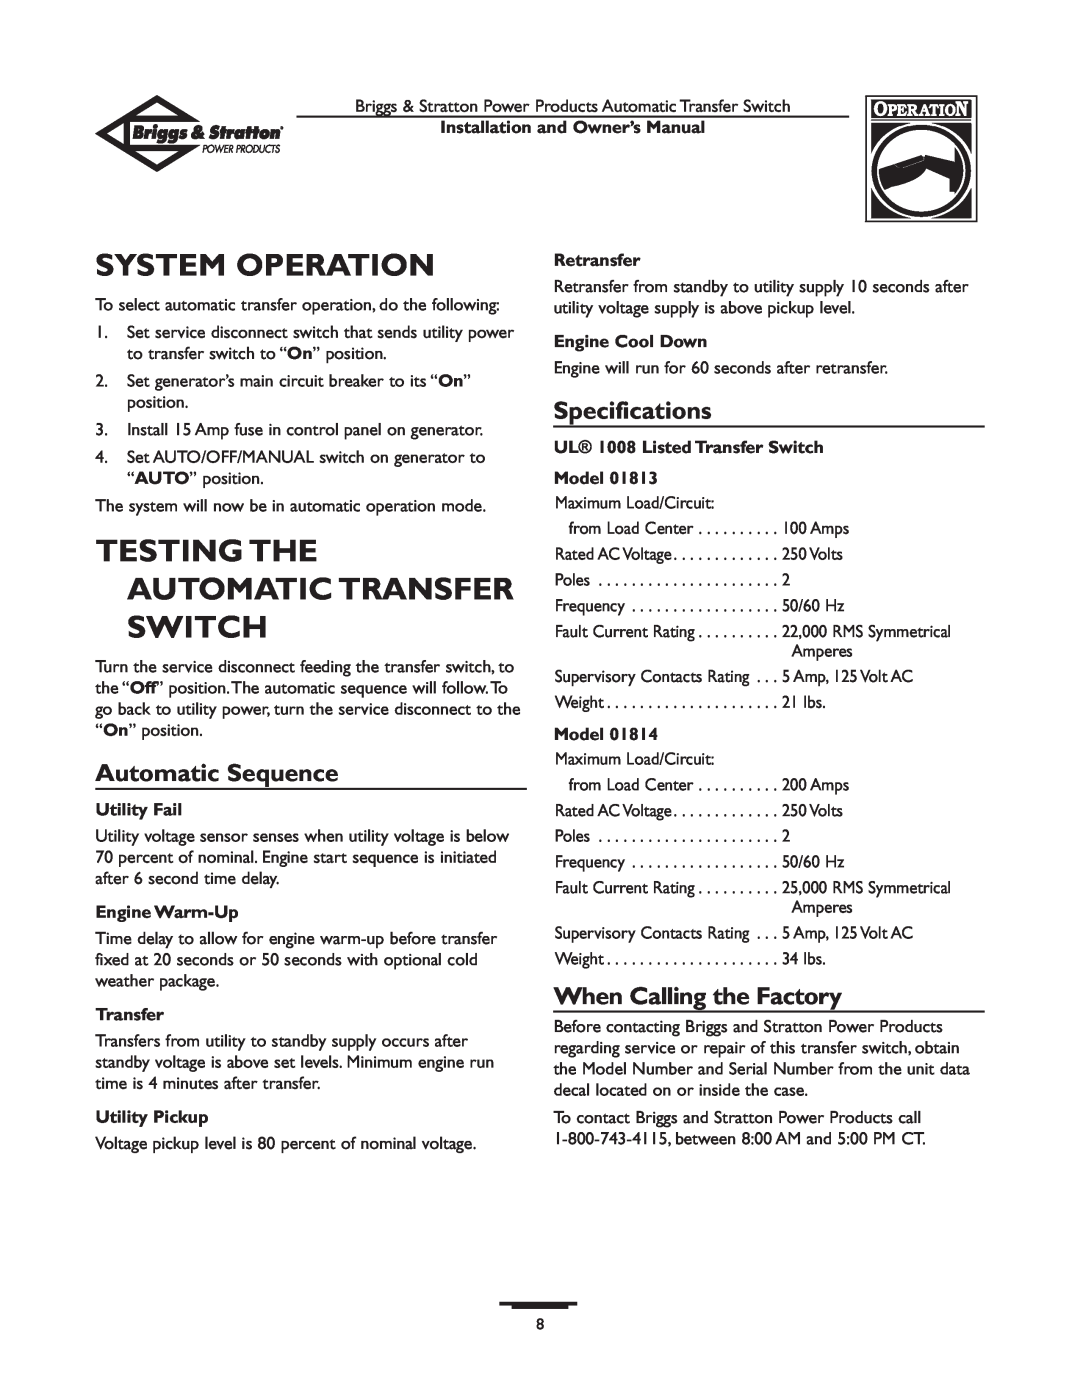 Briggs & Stratton 01814-0 System Operation, Testing The Automatic Transfer Switch, Automatic Sequence, Specifications 